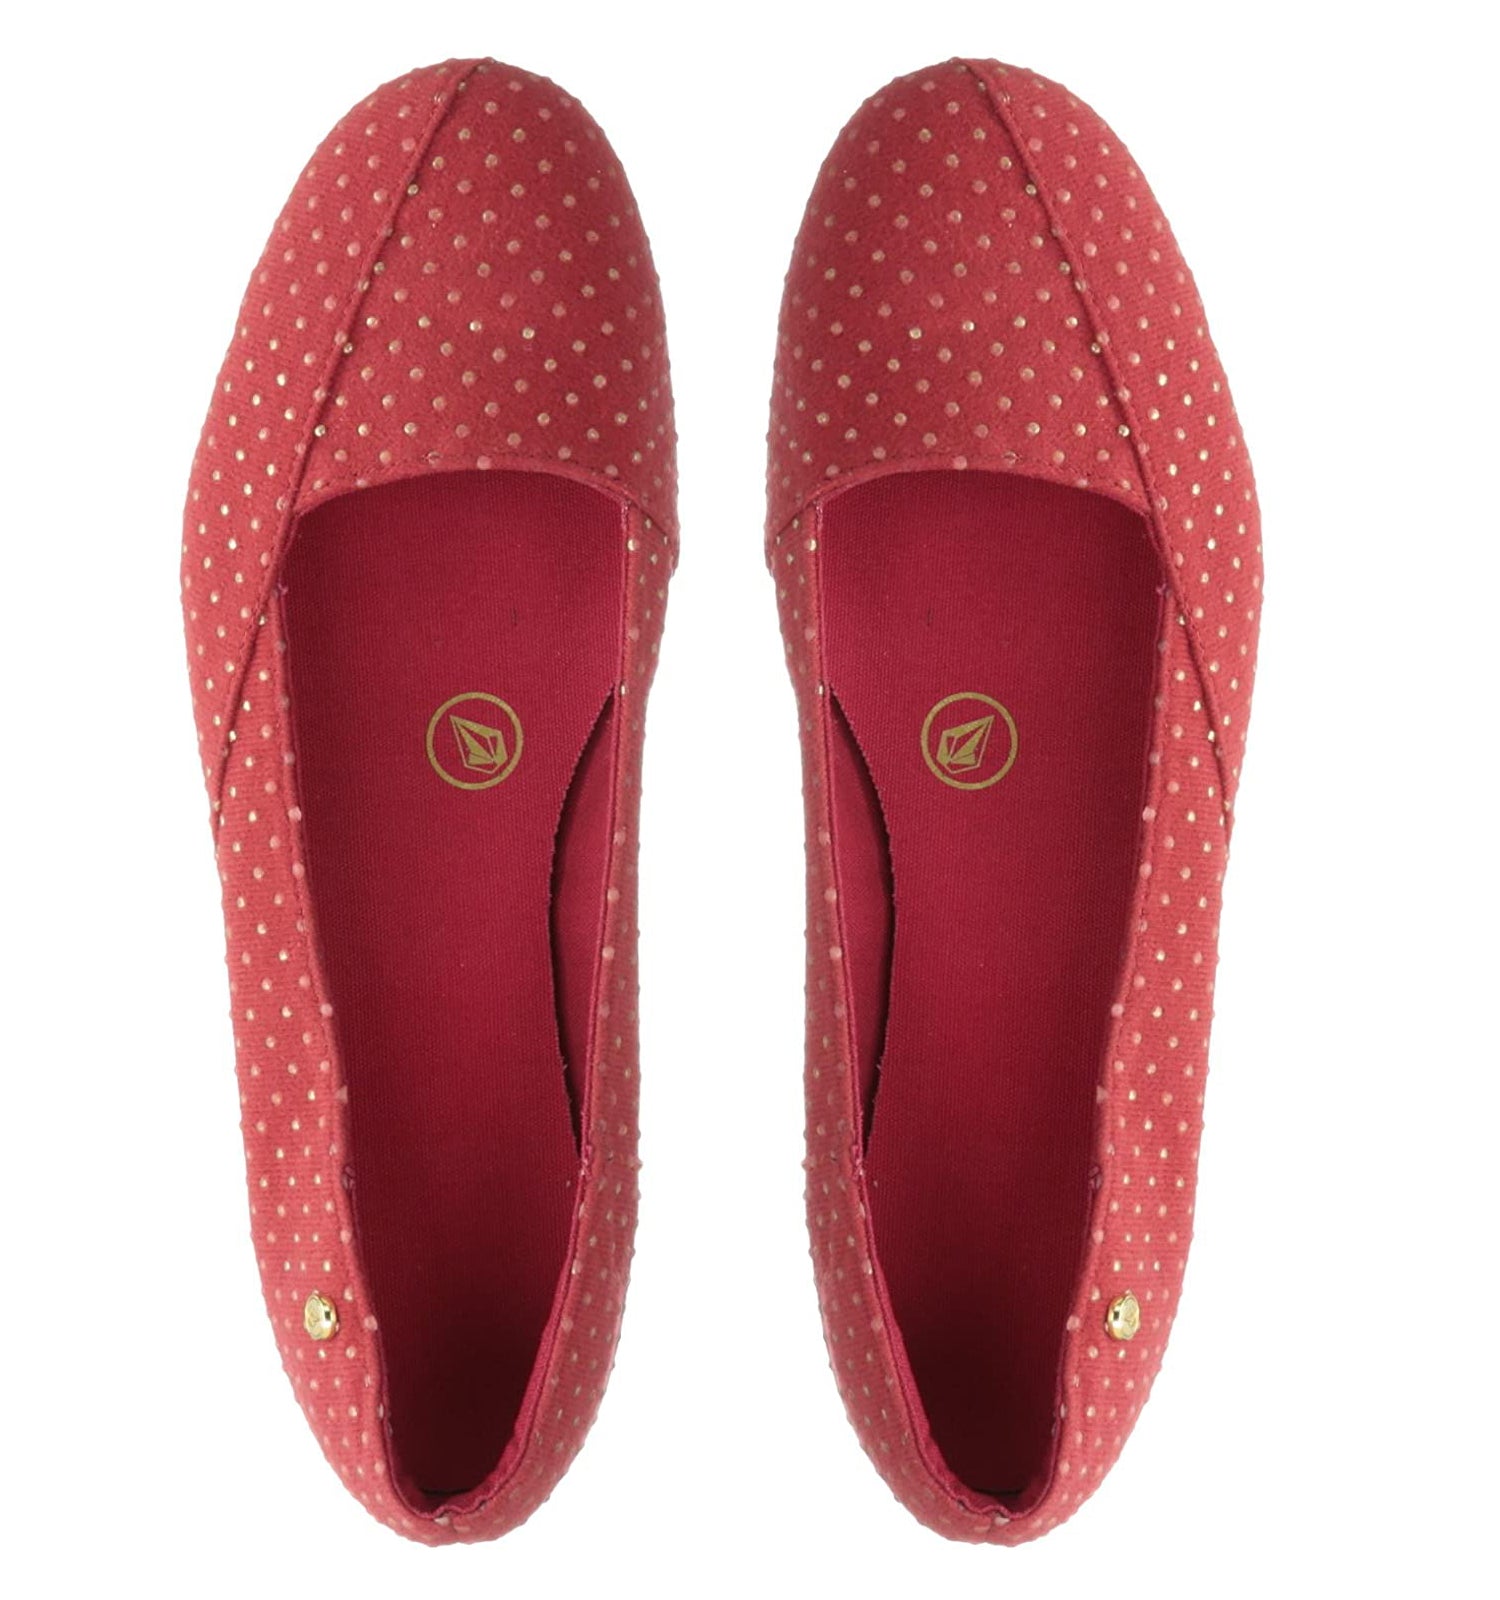 Volcom Game On Womens Shoe Red Studs 8